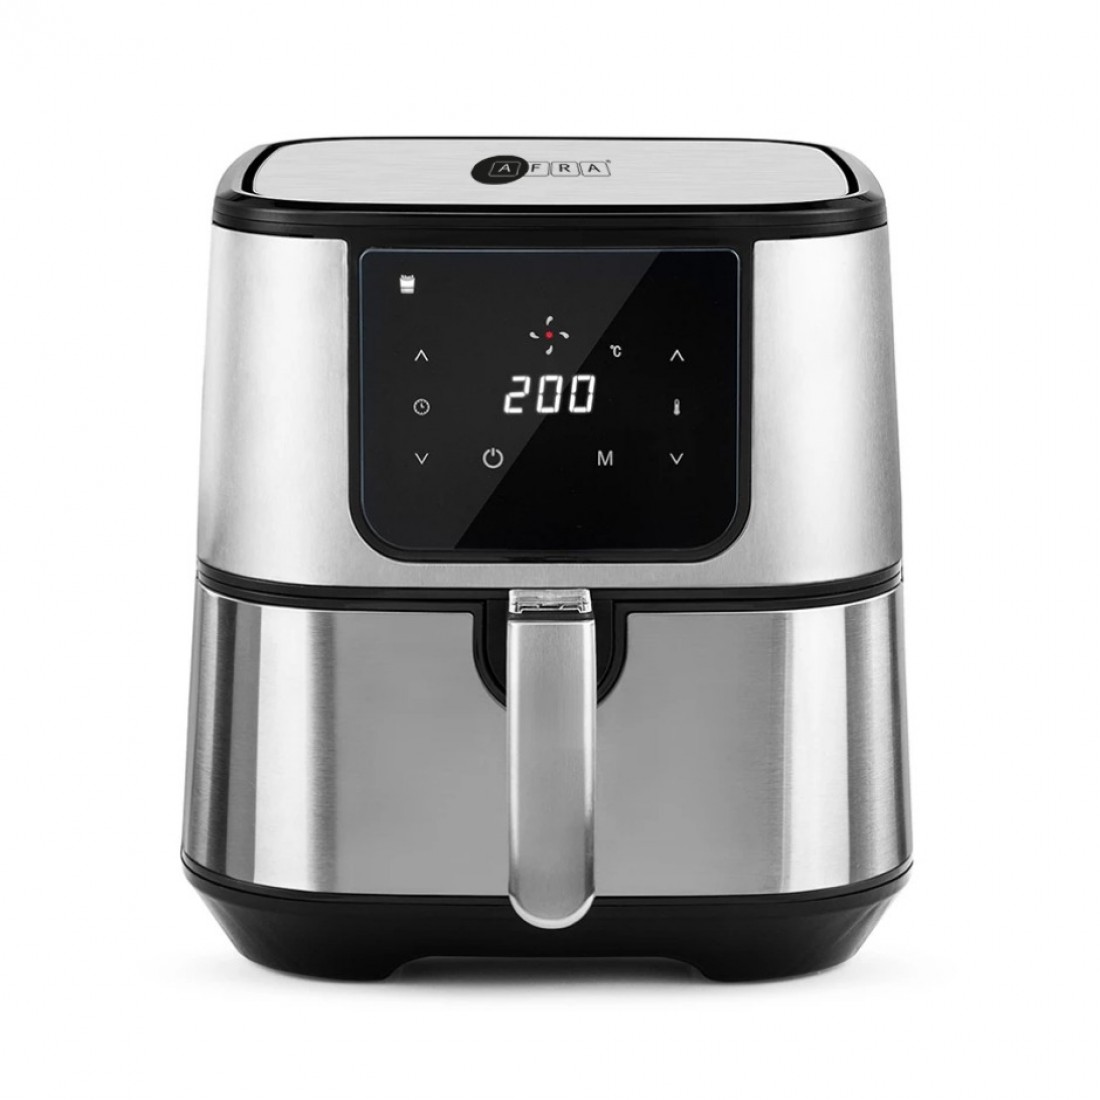 AFRA Air Fryer, 1600-1800W, 5.5L Capacity, Adjustable Temperature, Overheat Protection, Non-Slip Feet, Cool Touch Handle, G-MARK, ESMA, ROHS, And CB Certified, AF-5518AFSS, 2 Years Warranty